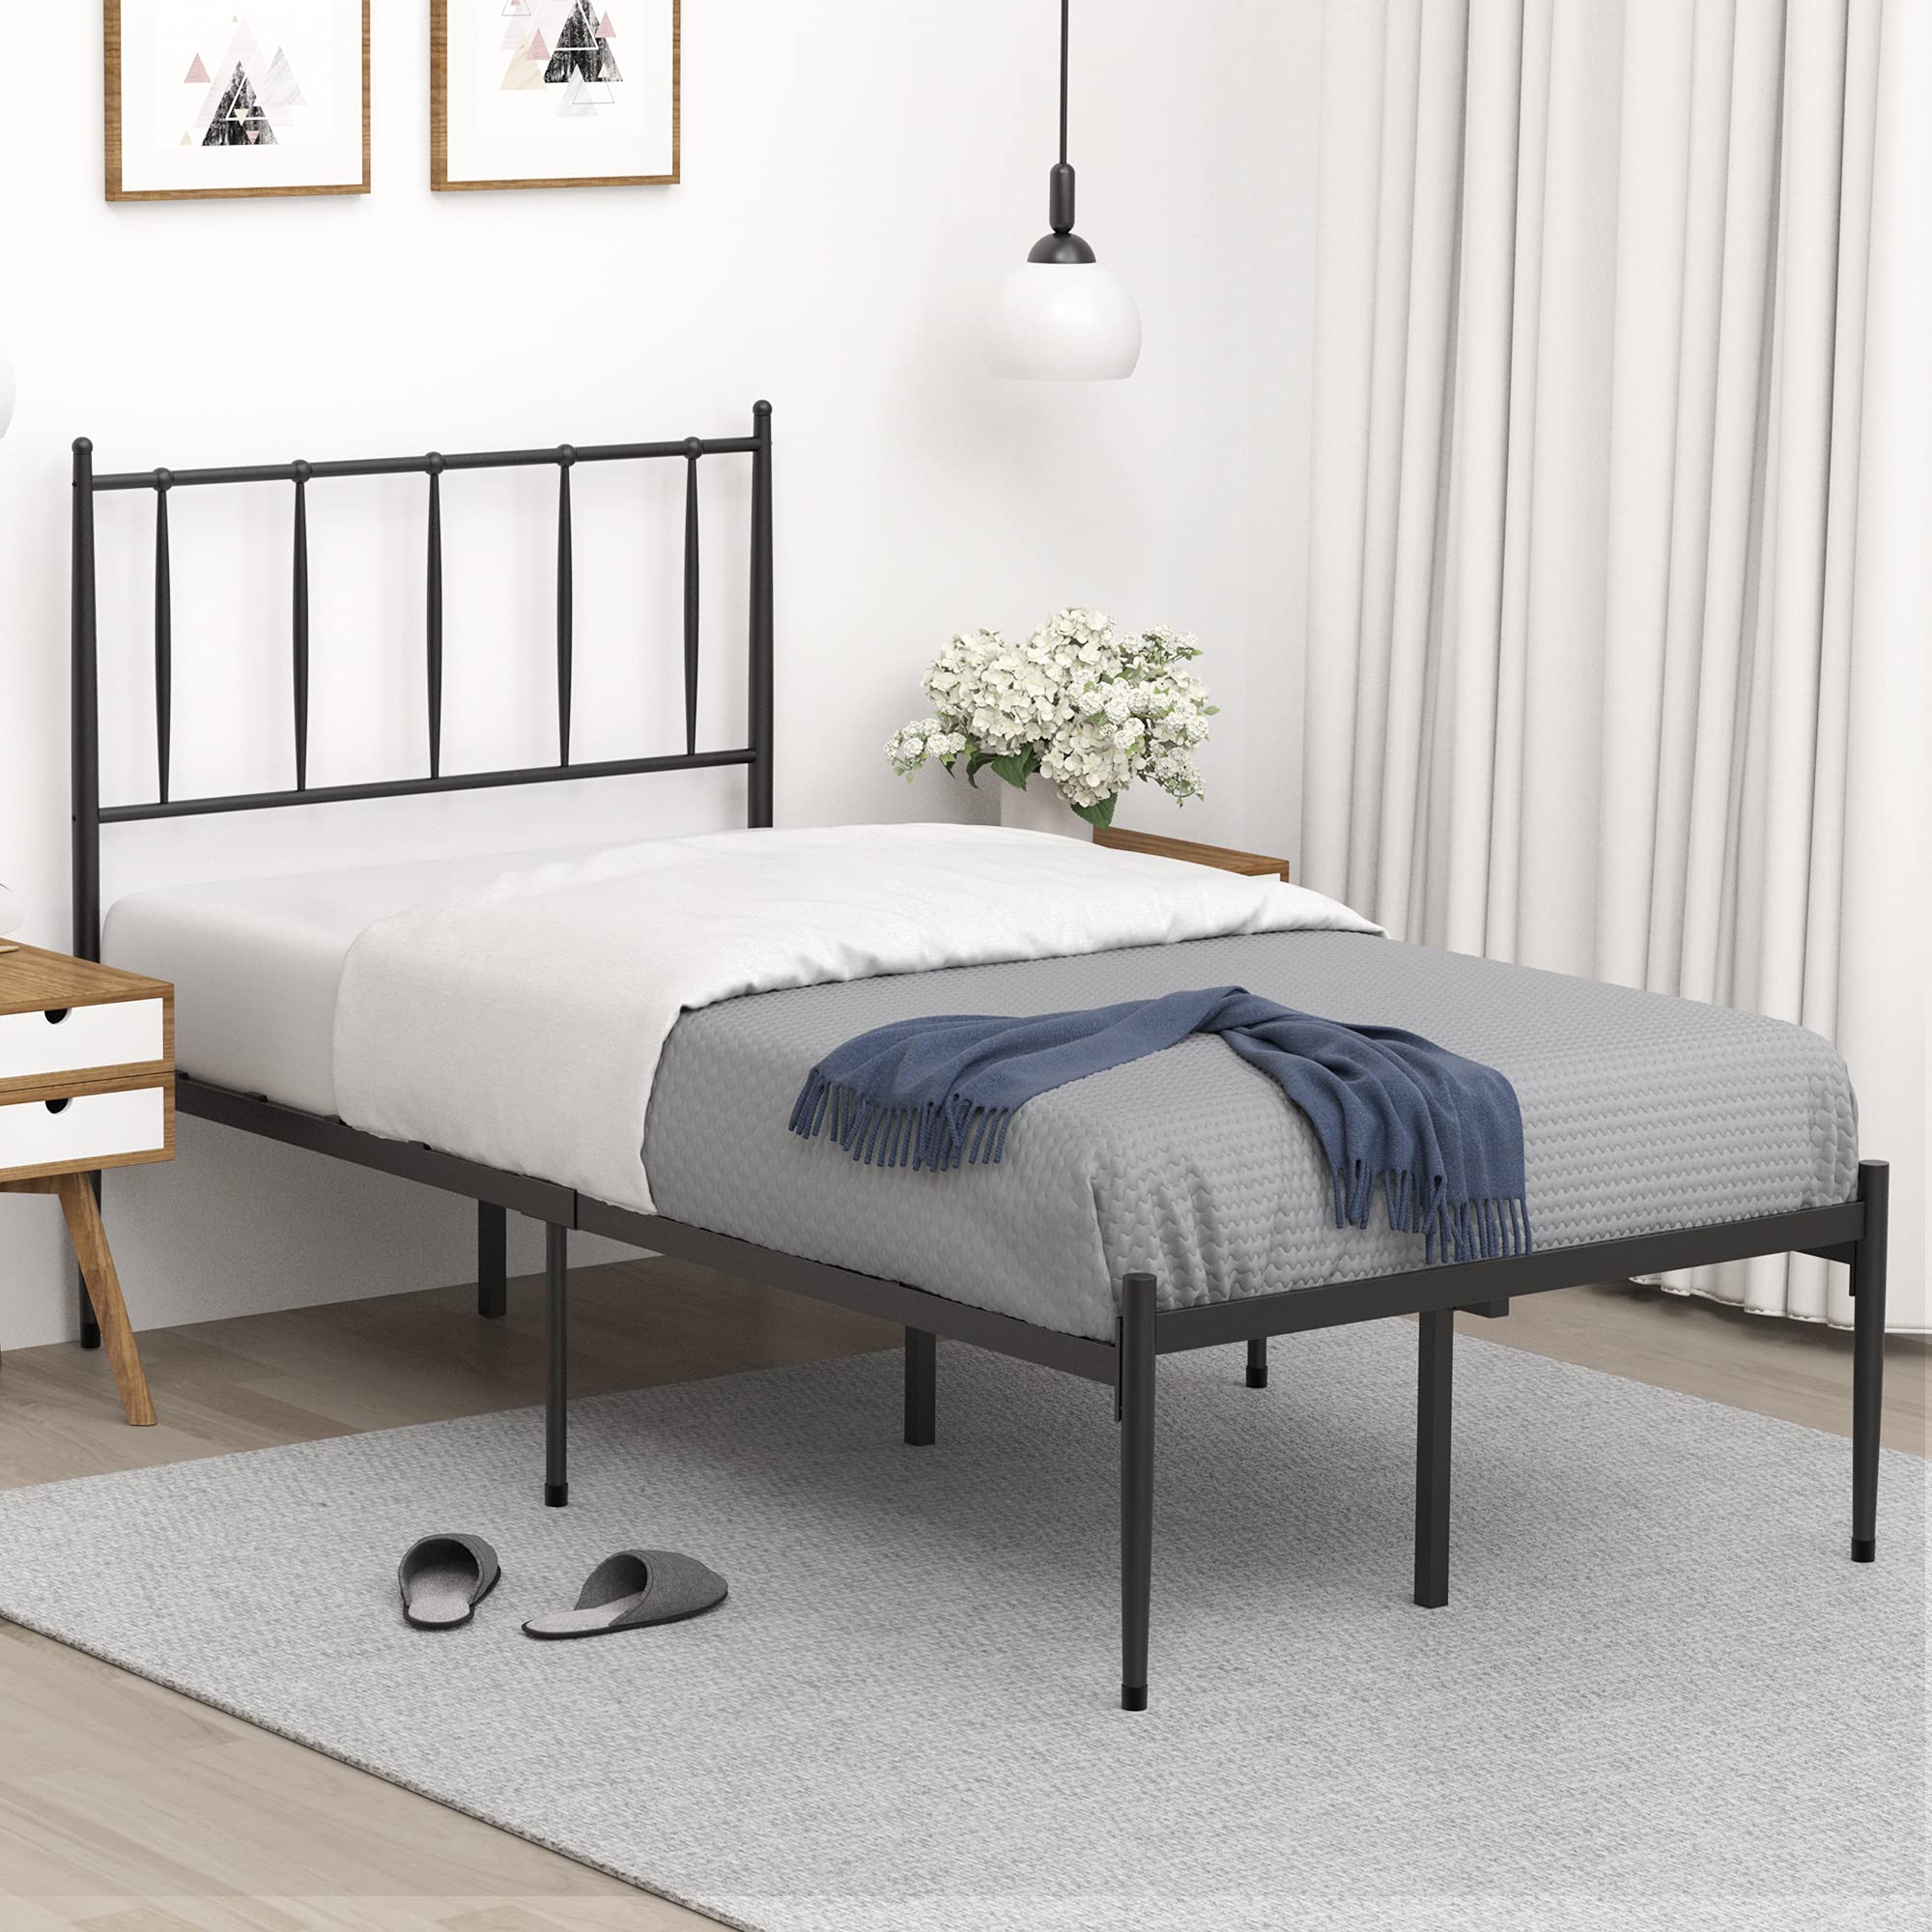 IDEALHOUSE Twin Size Metal Platform Bed Frame with Headboard, Bed Frame Mattress Foundation with Slat Support and 12.3 Storage H